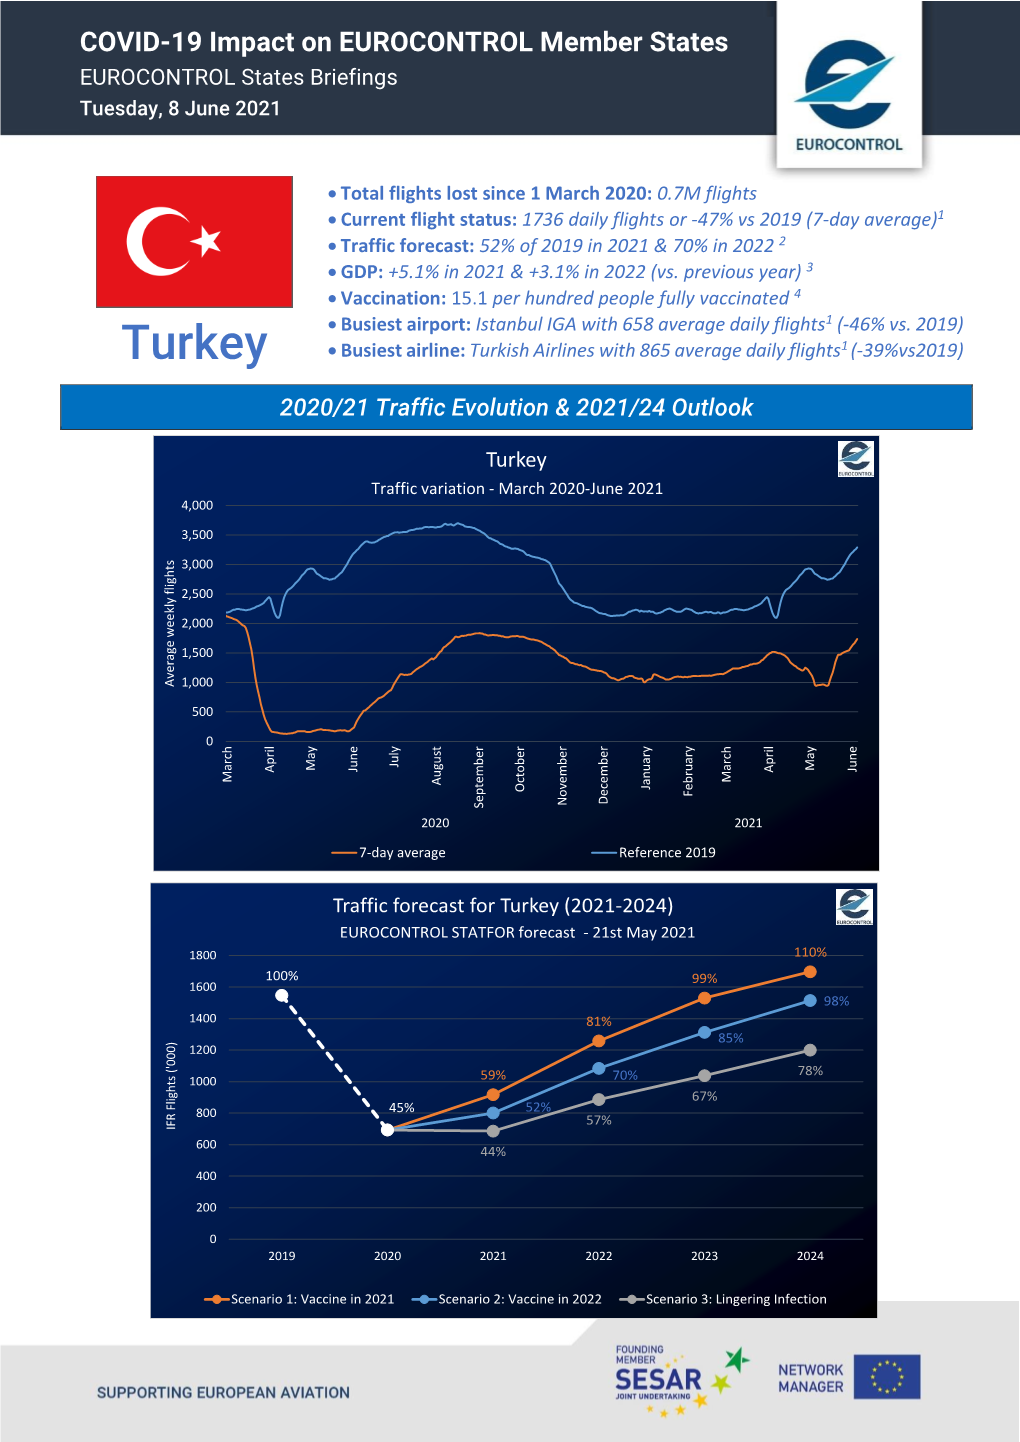 Turkey  Busiest Airline: Turkish Airlines with 865 Average Daily Flights1 (-39%Vs2019)